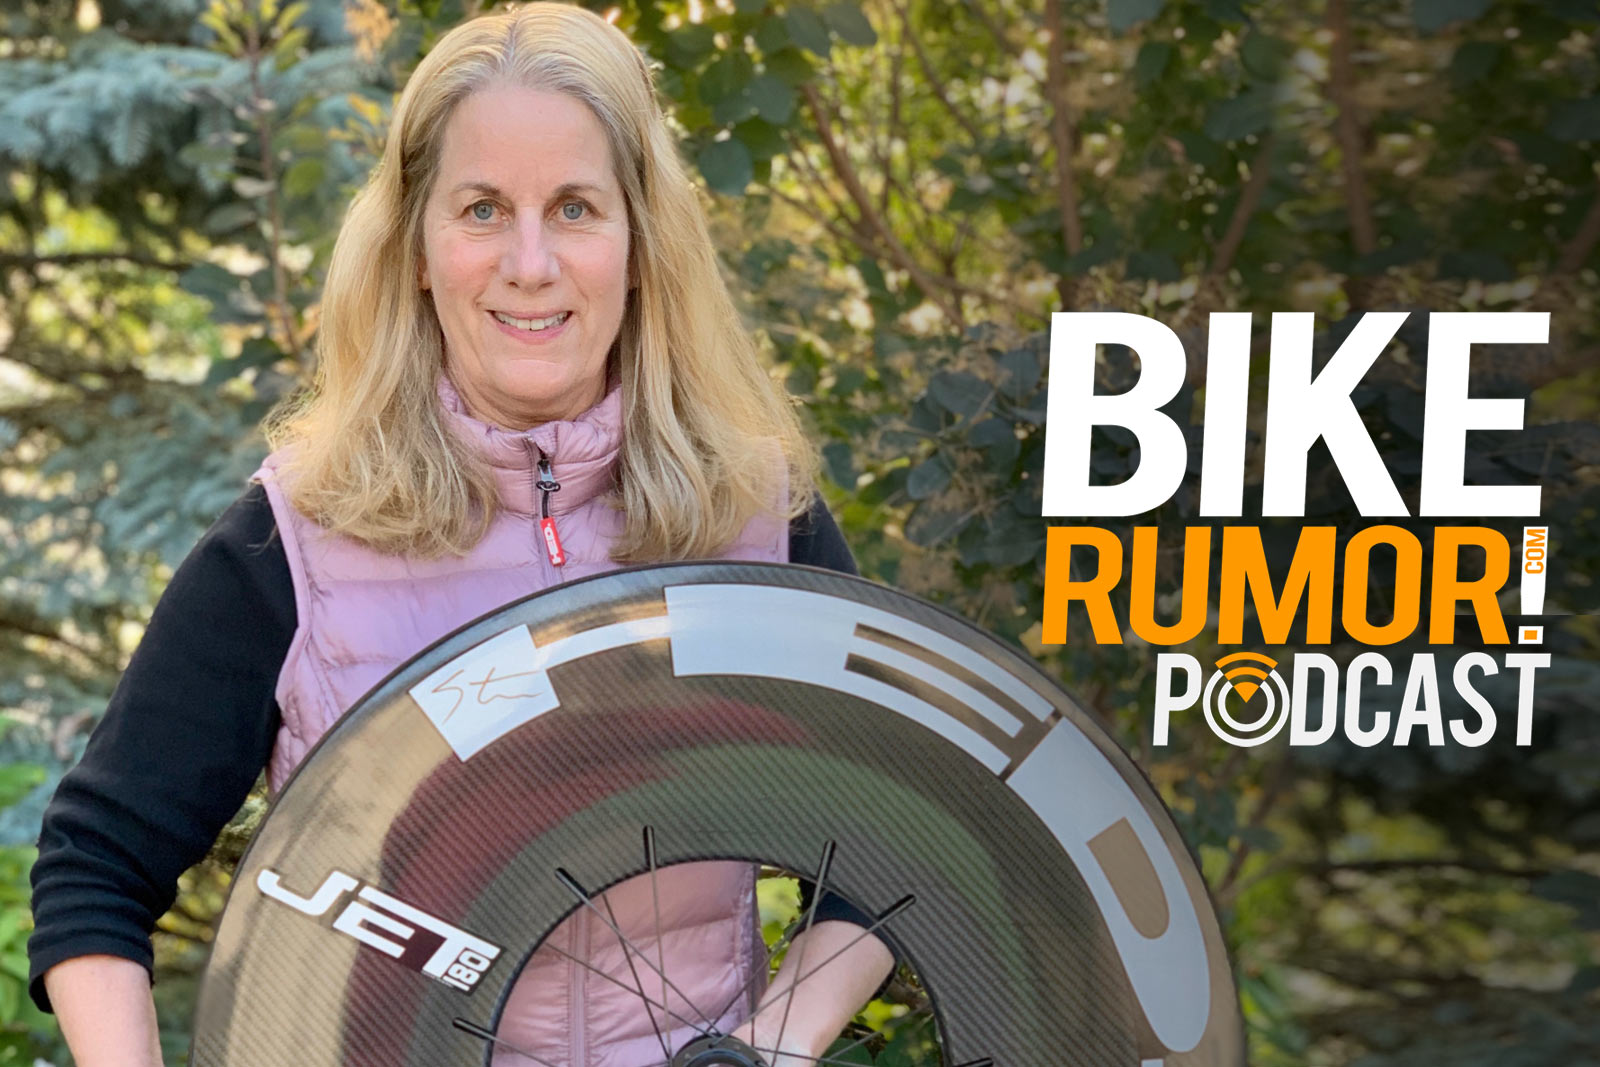 anne hed interview about hed cycling's startup story and 180mm aero wheel development